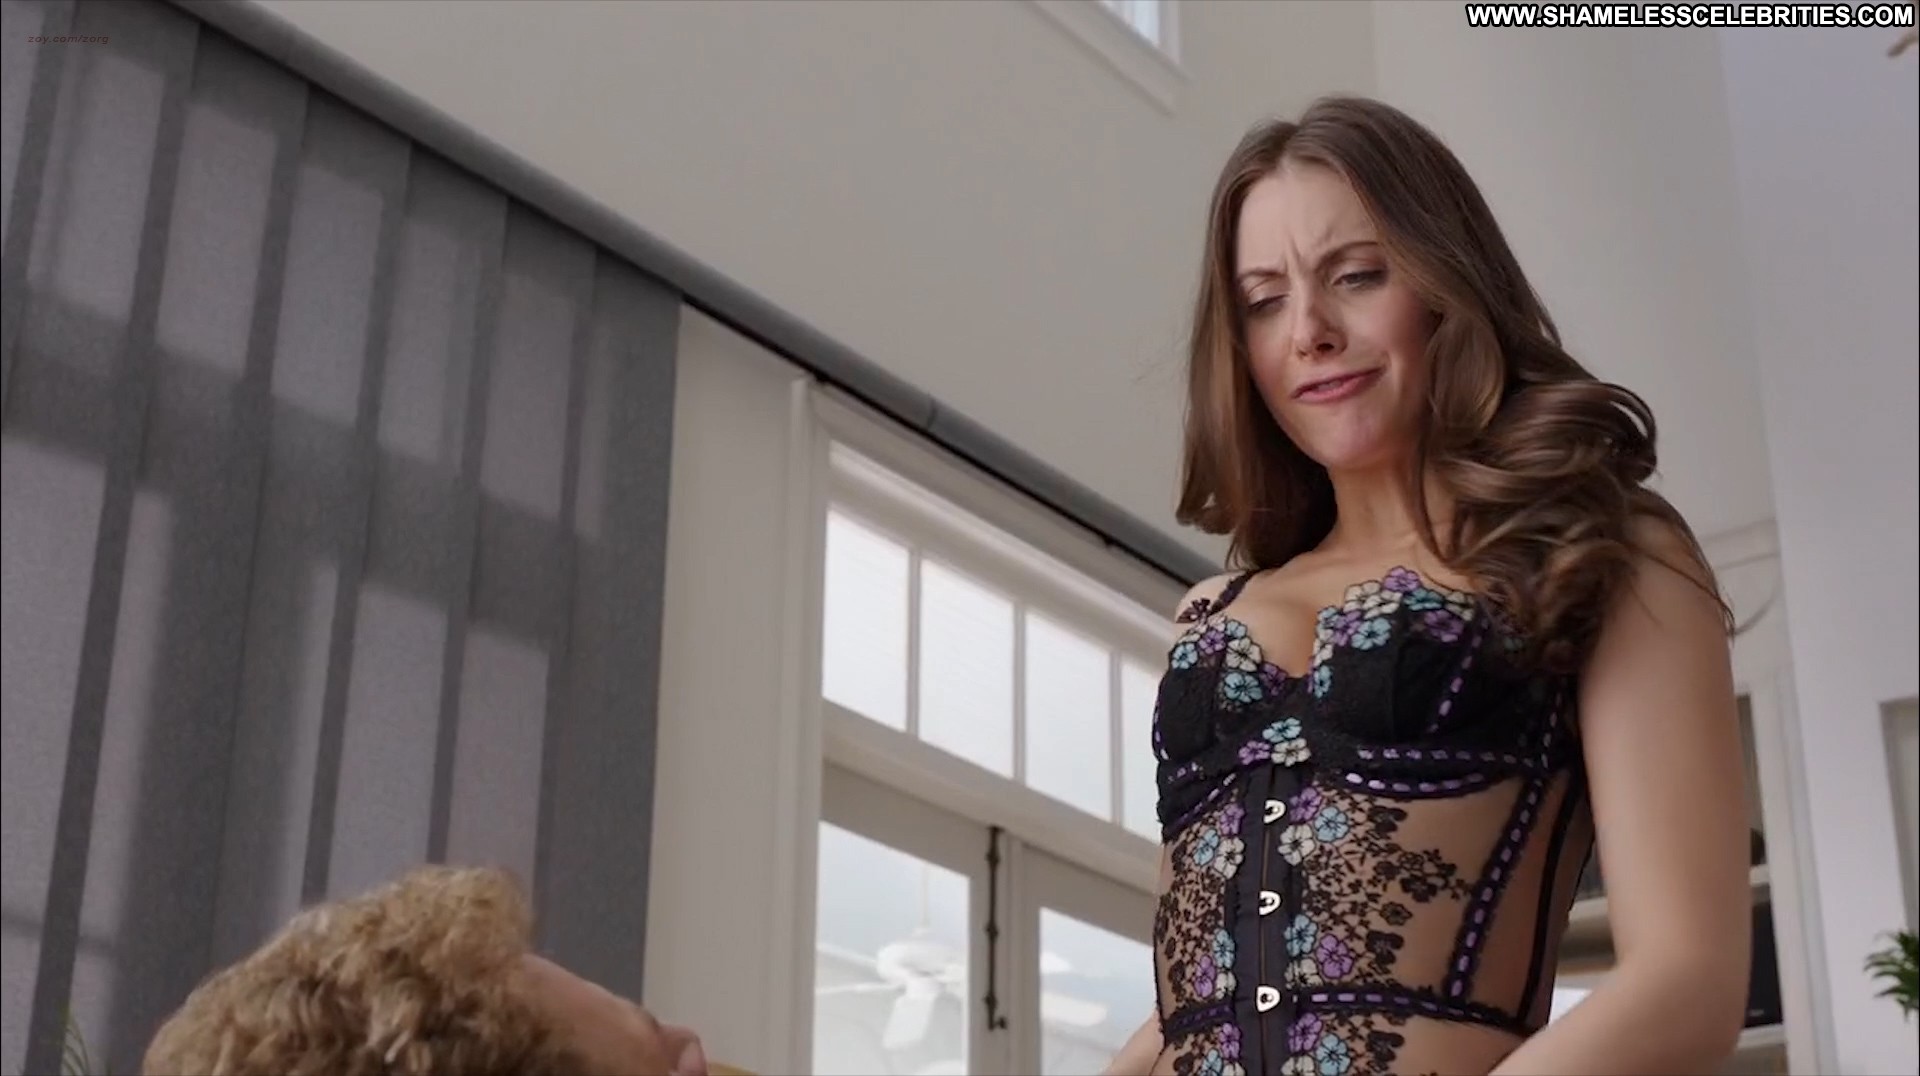 Get Hard Alison Brie Posing Hot Celebrity Hot Sexy Lingerie.